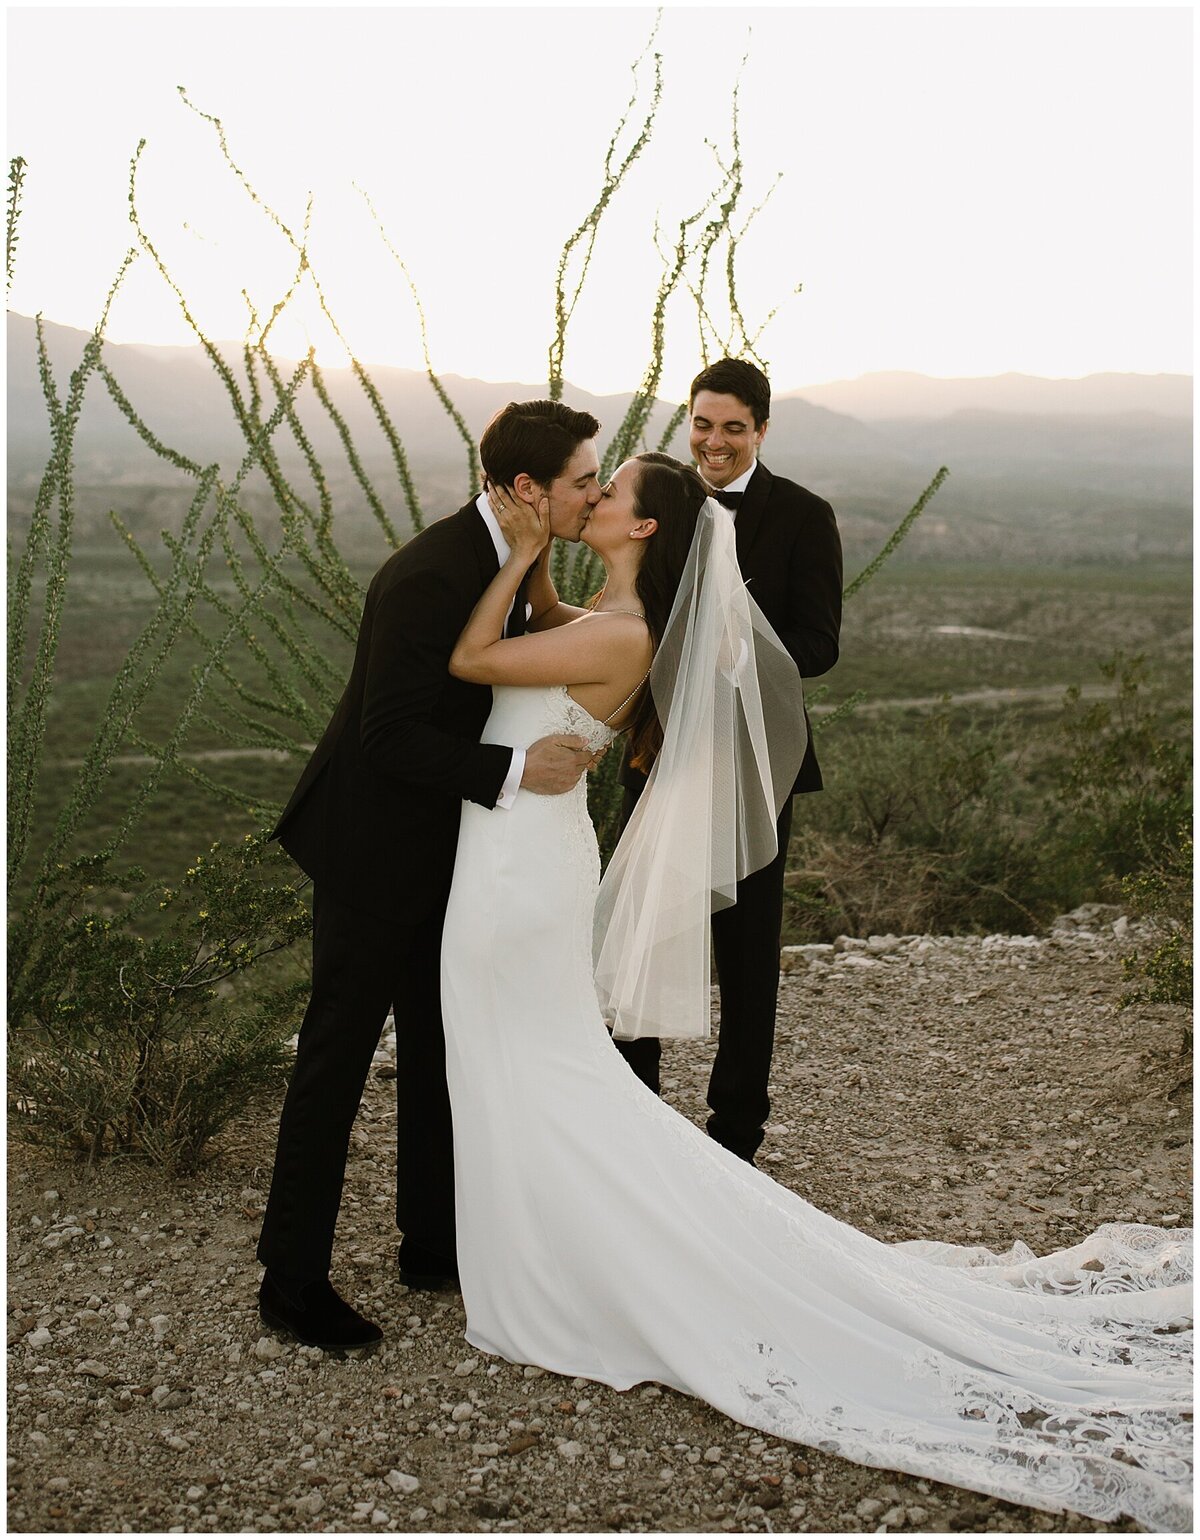 Marfa-Texas-Elopement-By-Amber-Vickery-Photography-78